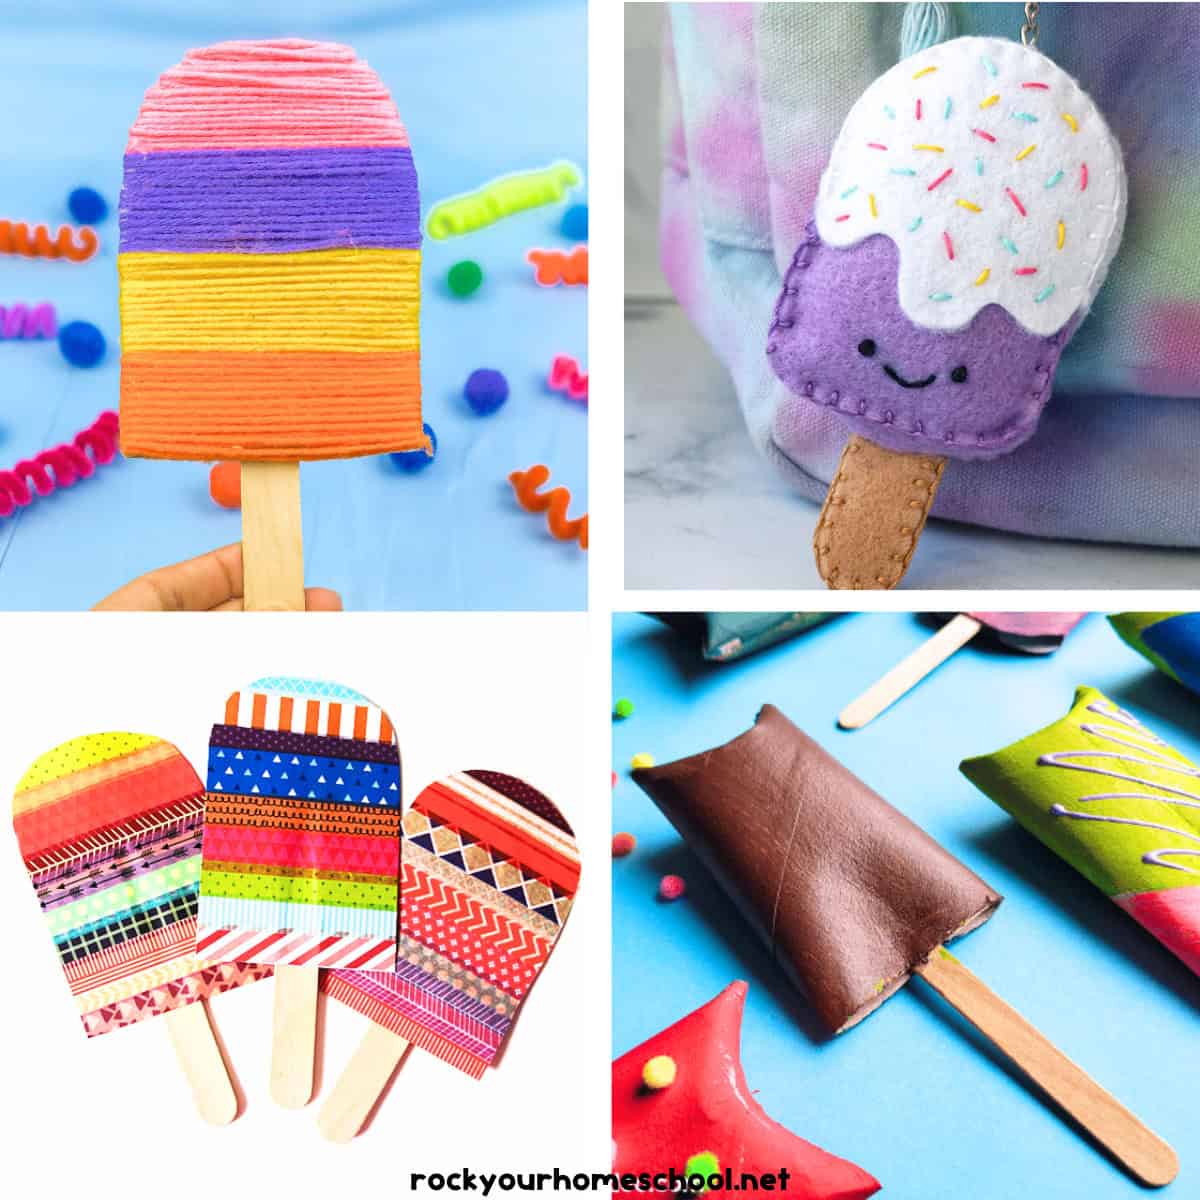 Popsicle Crafts for Kids: Cute and Colorful DIY Fun